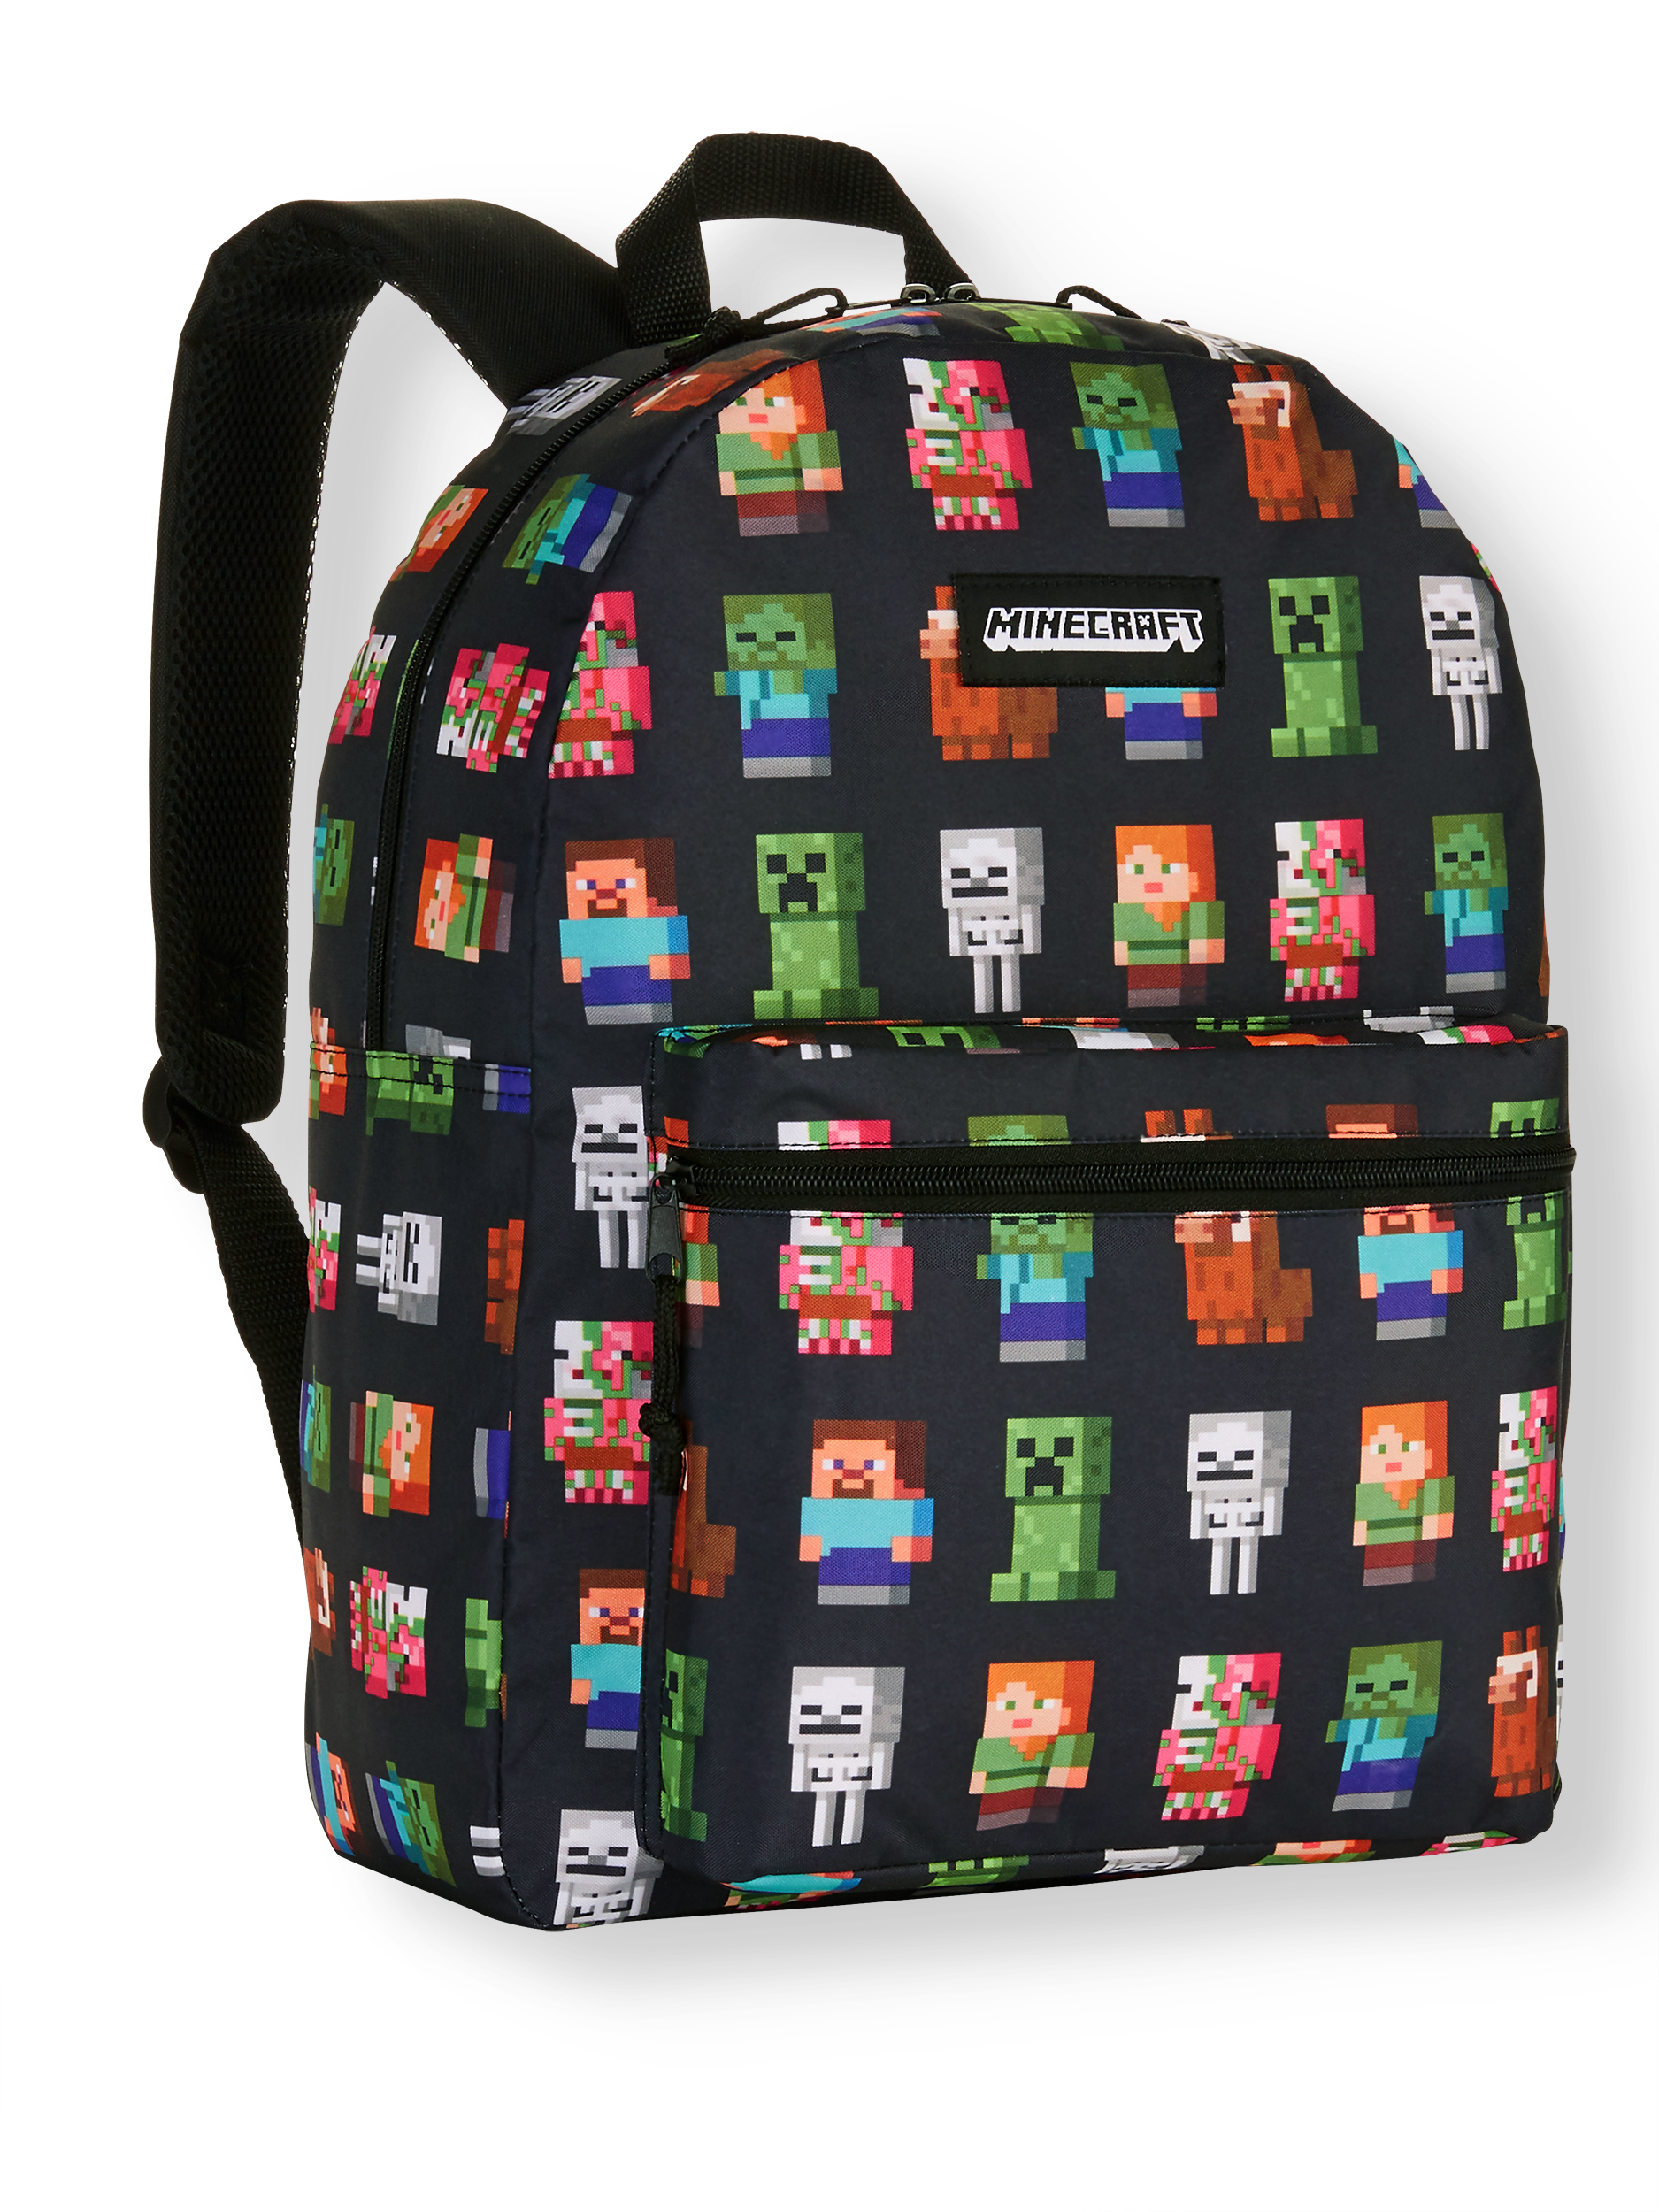 Minecraft Characters 16" Backpack - image 3 of 4